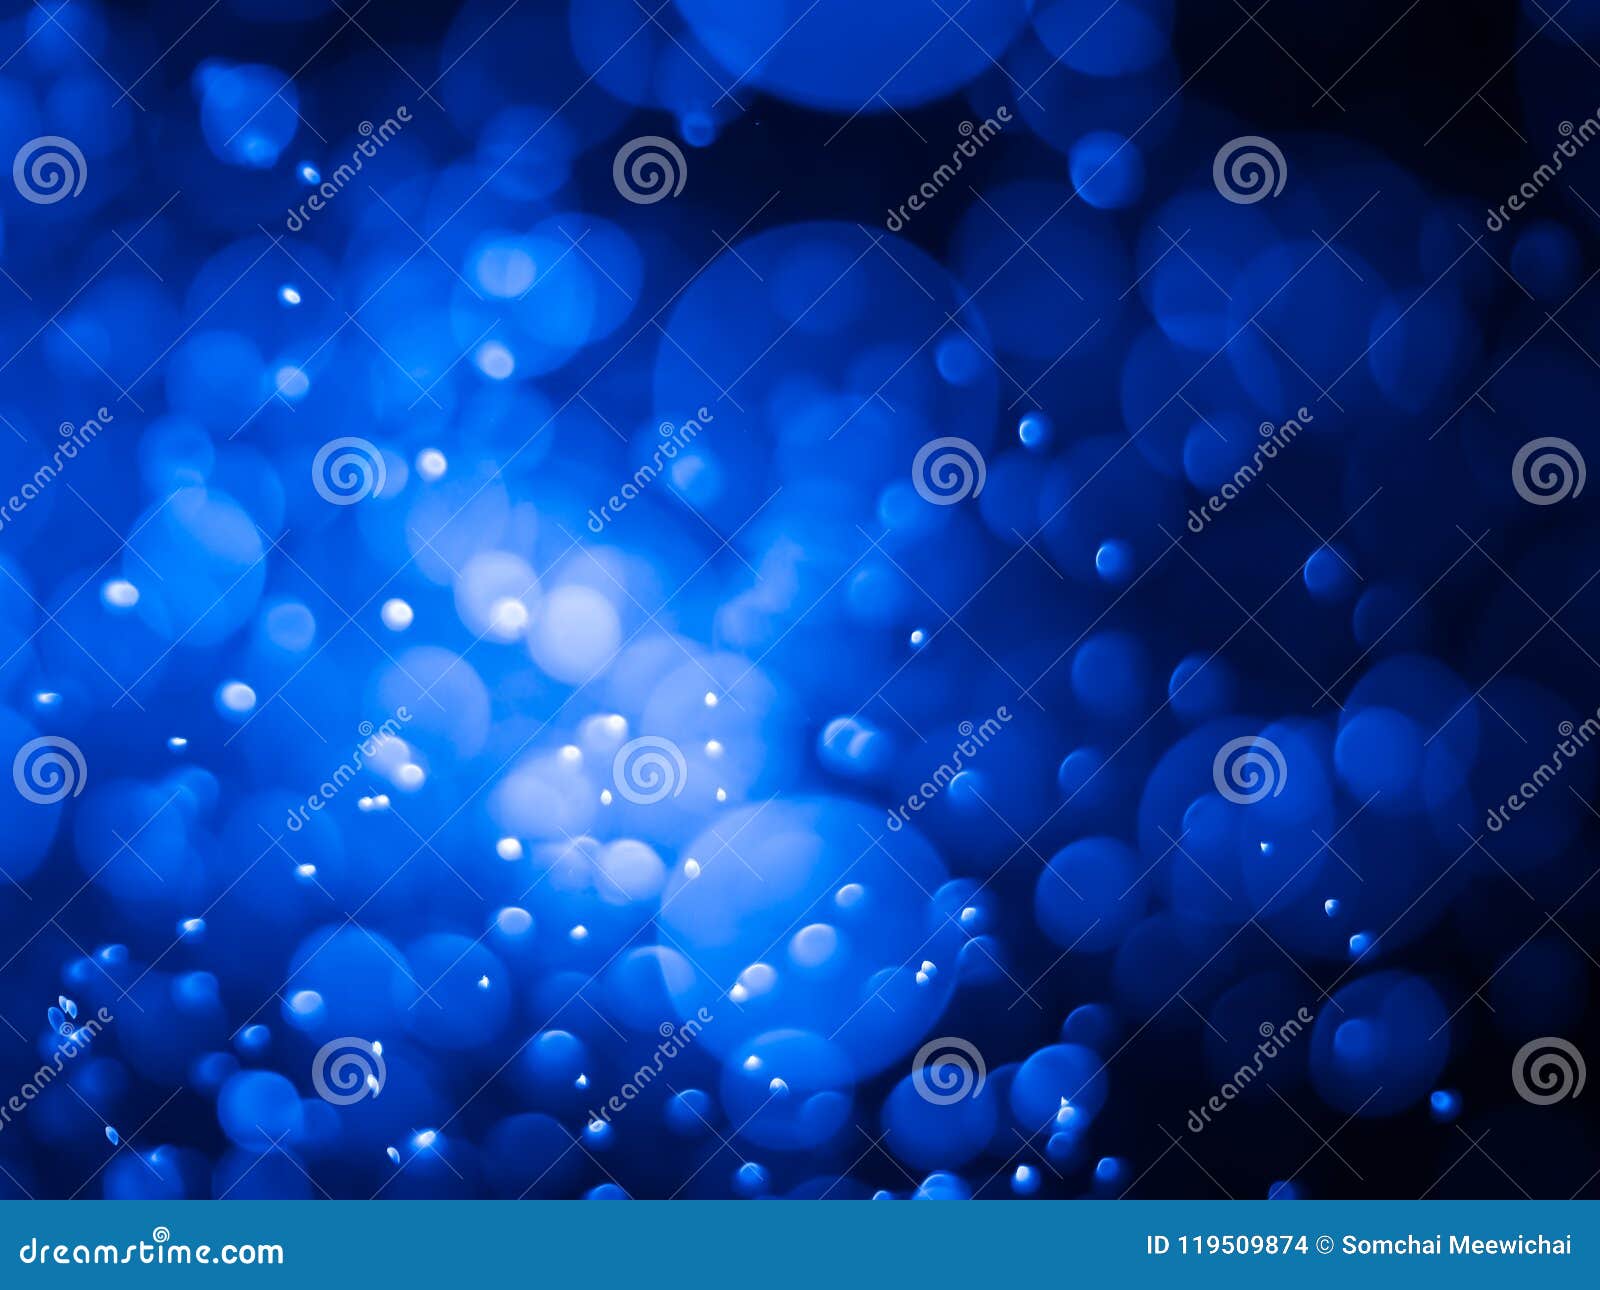 Blue Bubble Bokeh Abstract Background and Wallpaper Stock Photo - Image of  financial, internet: 119509874